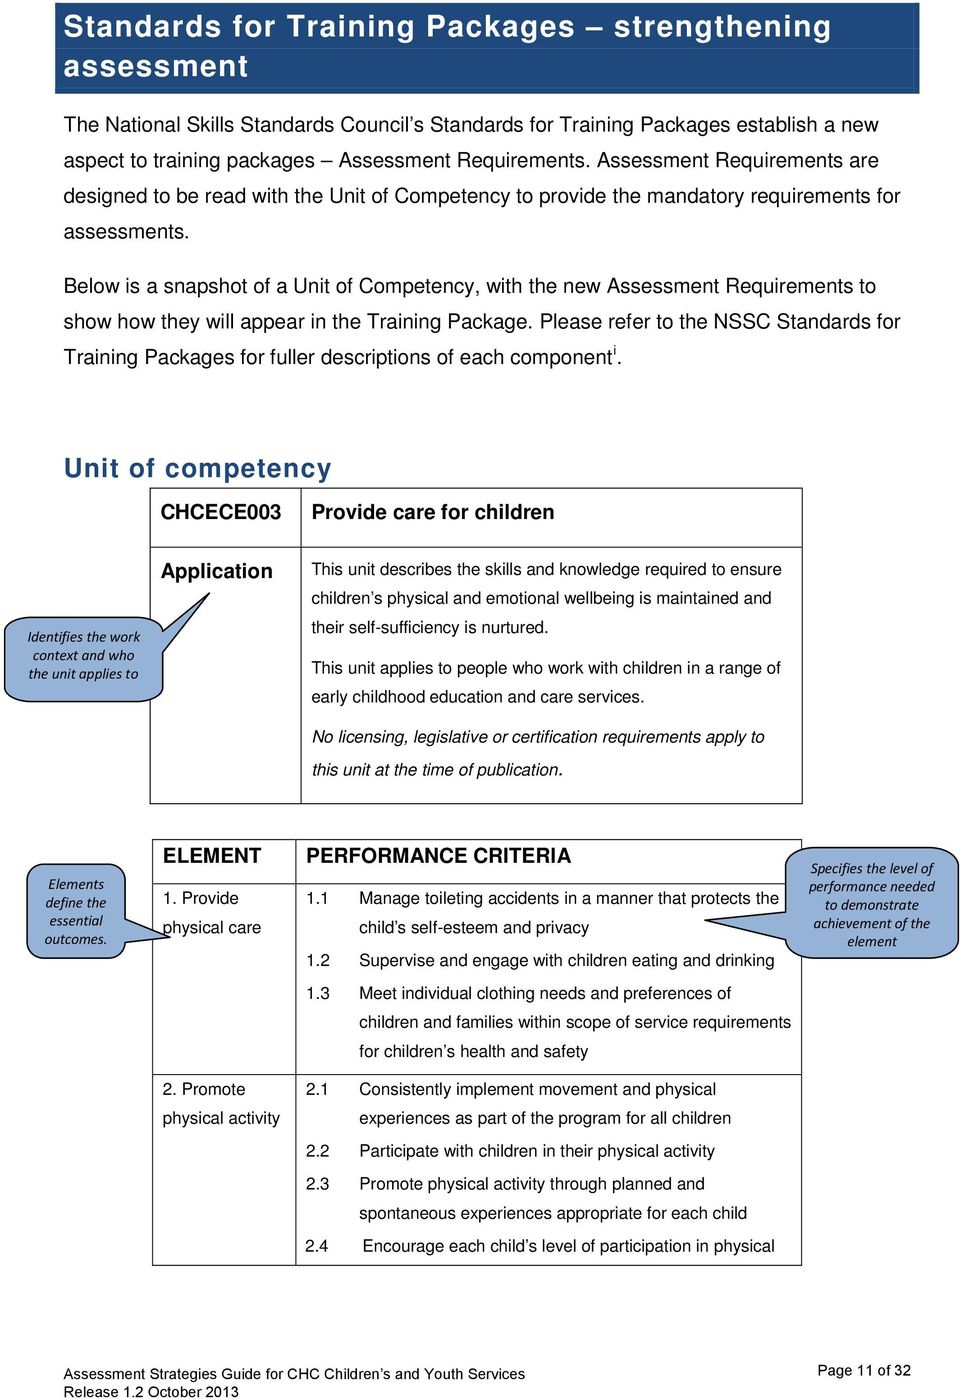 Below is a snapshot of a Unit of Competency, with the new Assessment Requirements to show how they will appear in the Training Package.